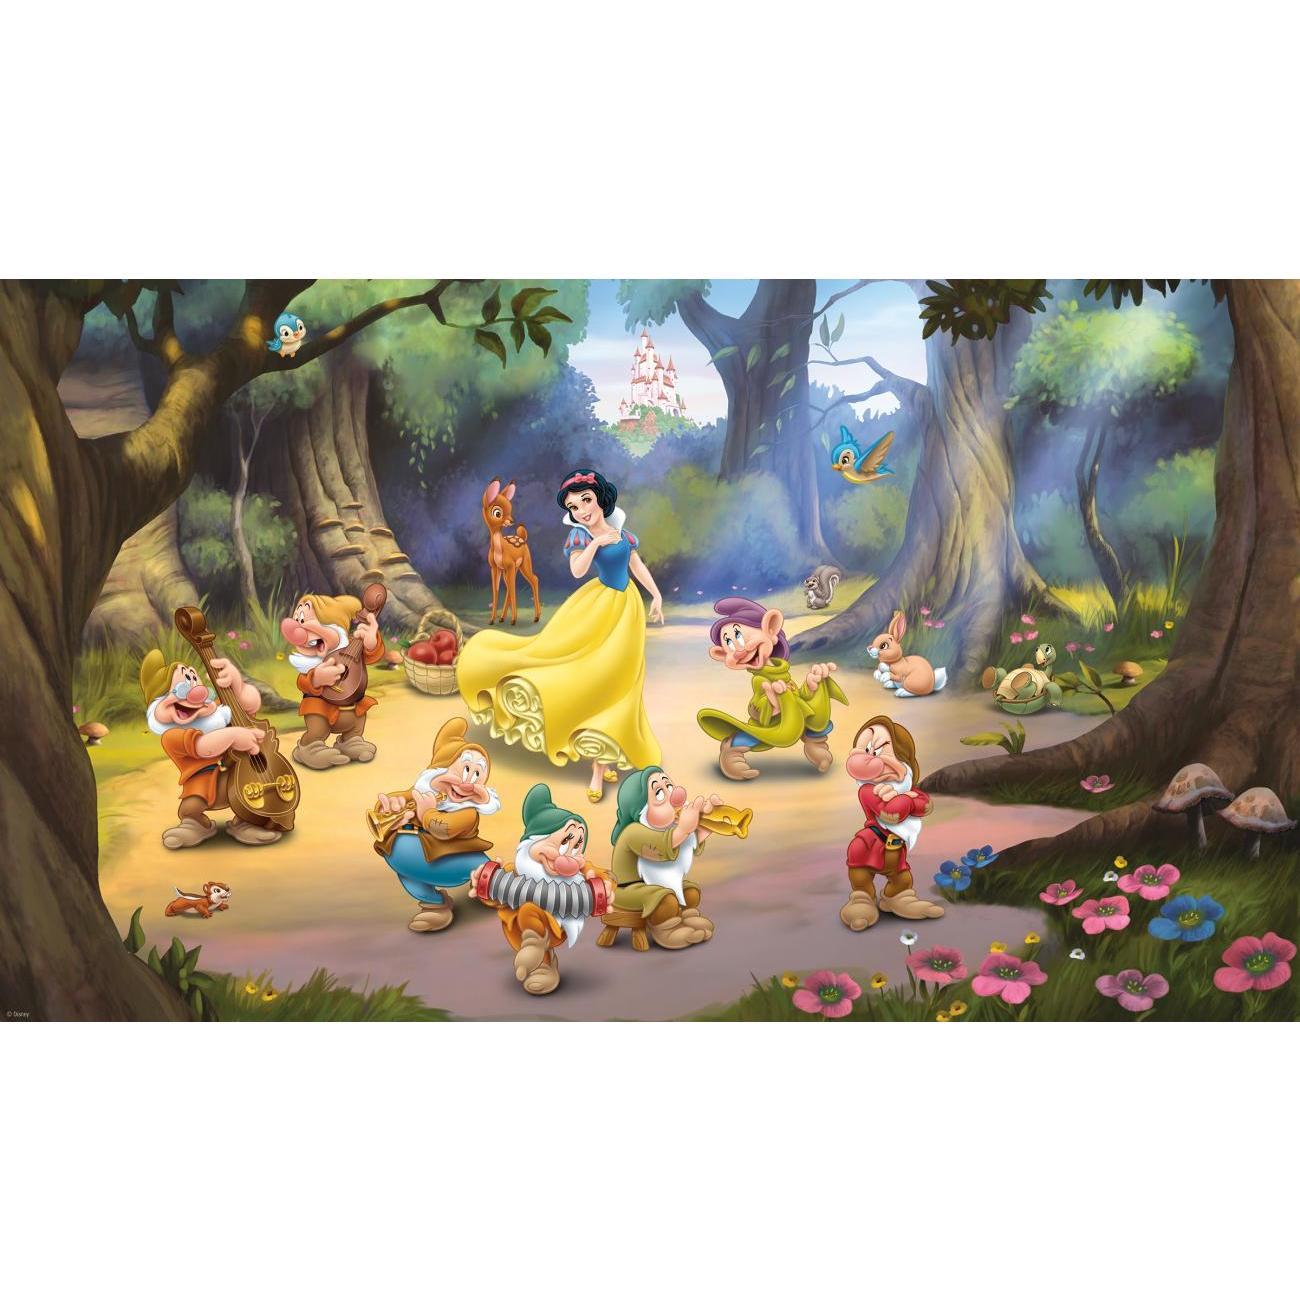 Snow White and the Seven Dwarfs XL Spray and Stick Wallpaper Mural Wall Murals RoomMates Mural  